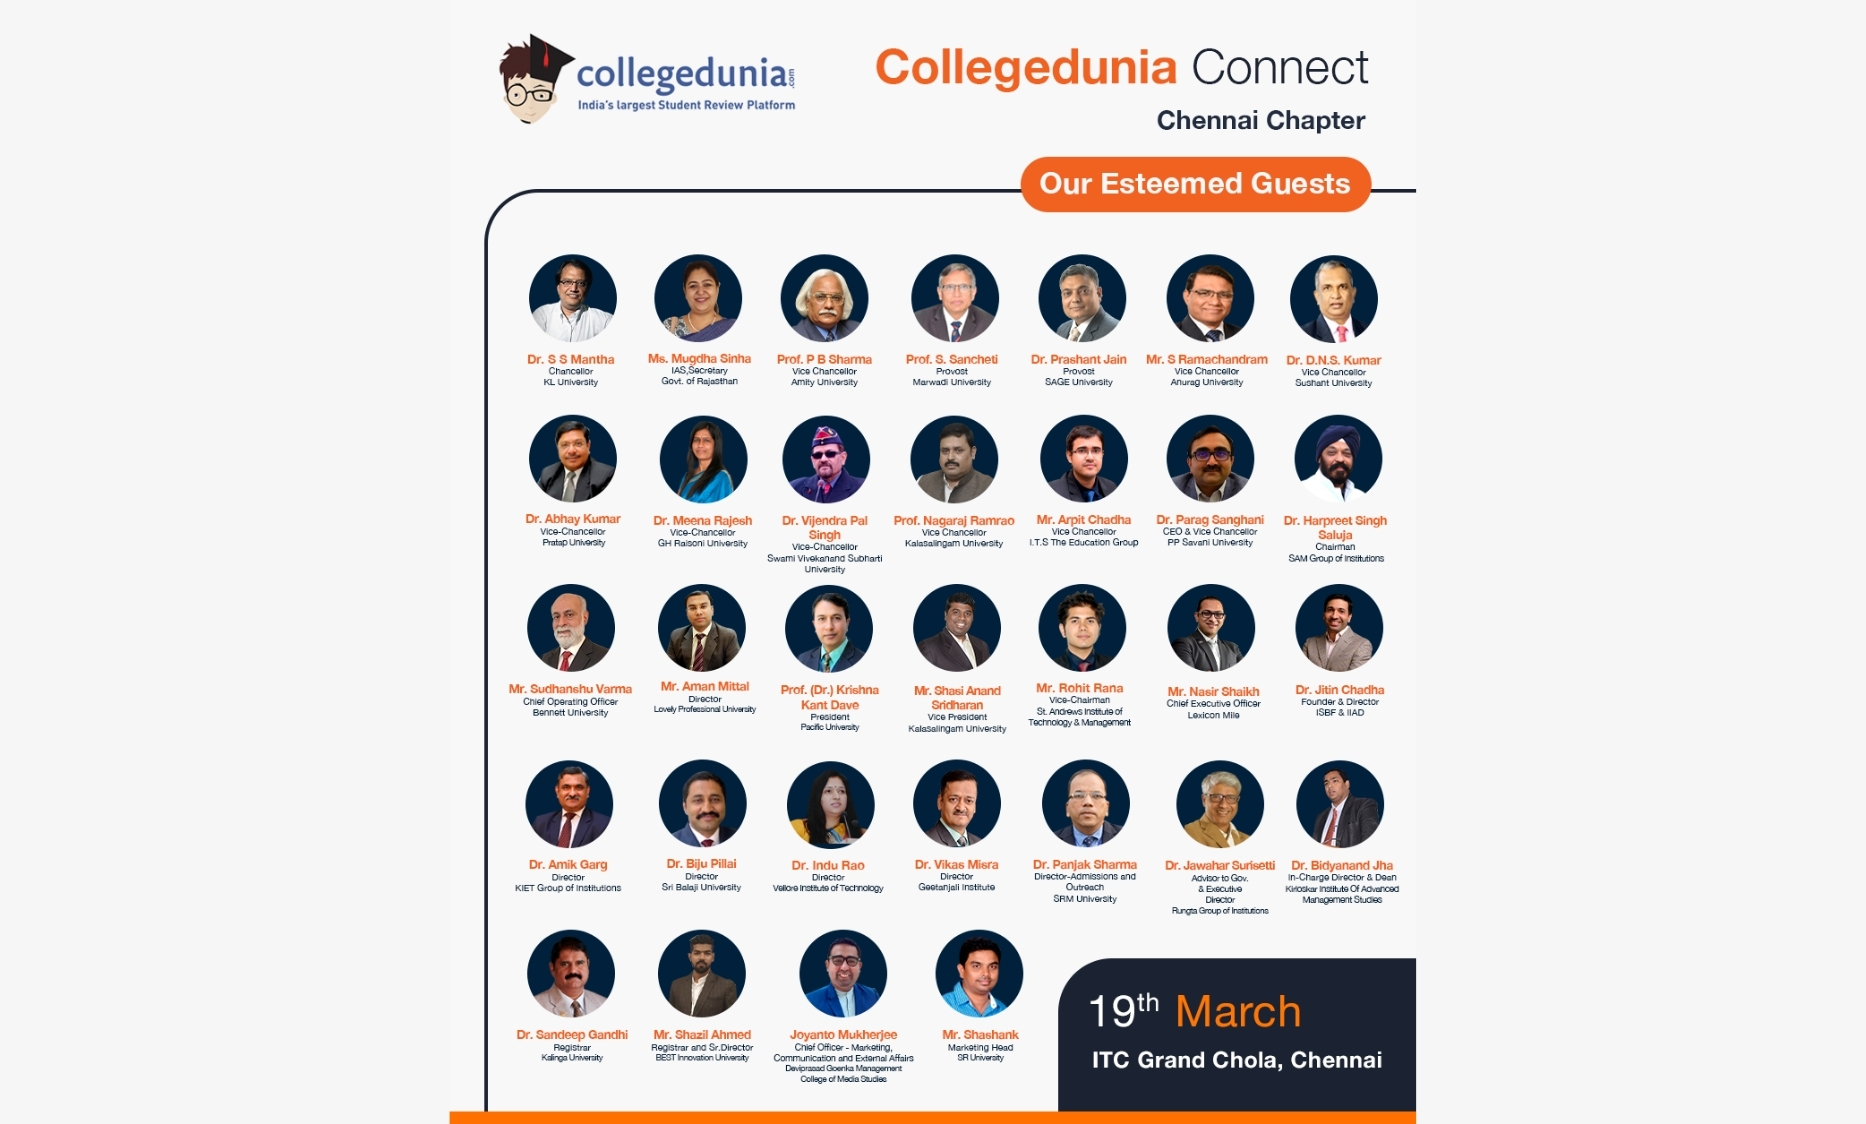 Collegedunia.com is organising a leadership conclave under its ongoing series 'Collegedunia Connect' - Digpu News